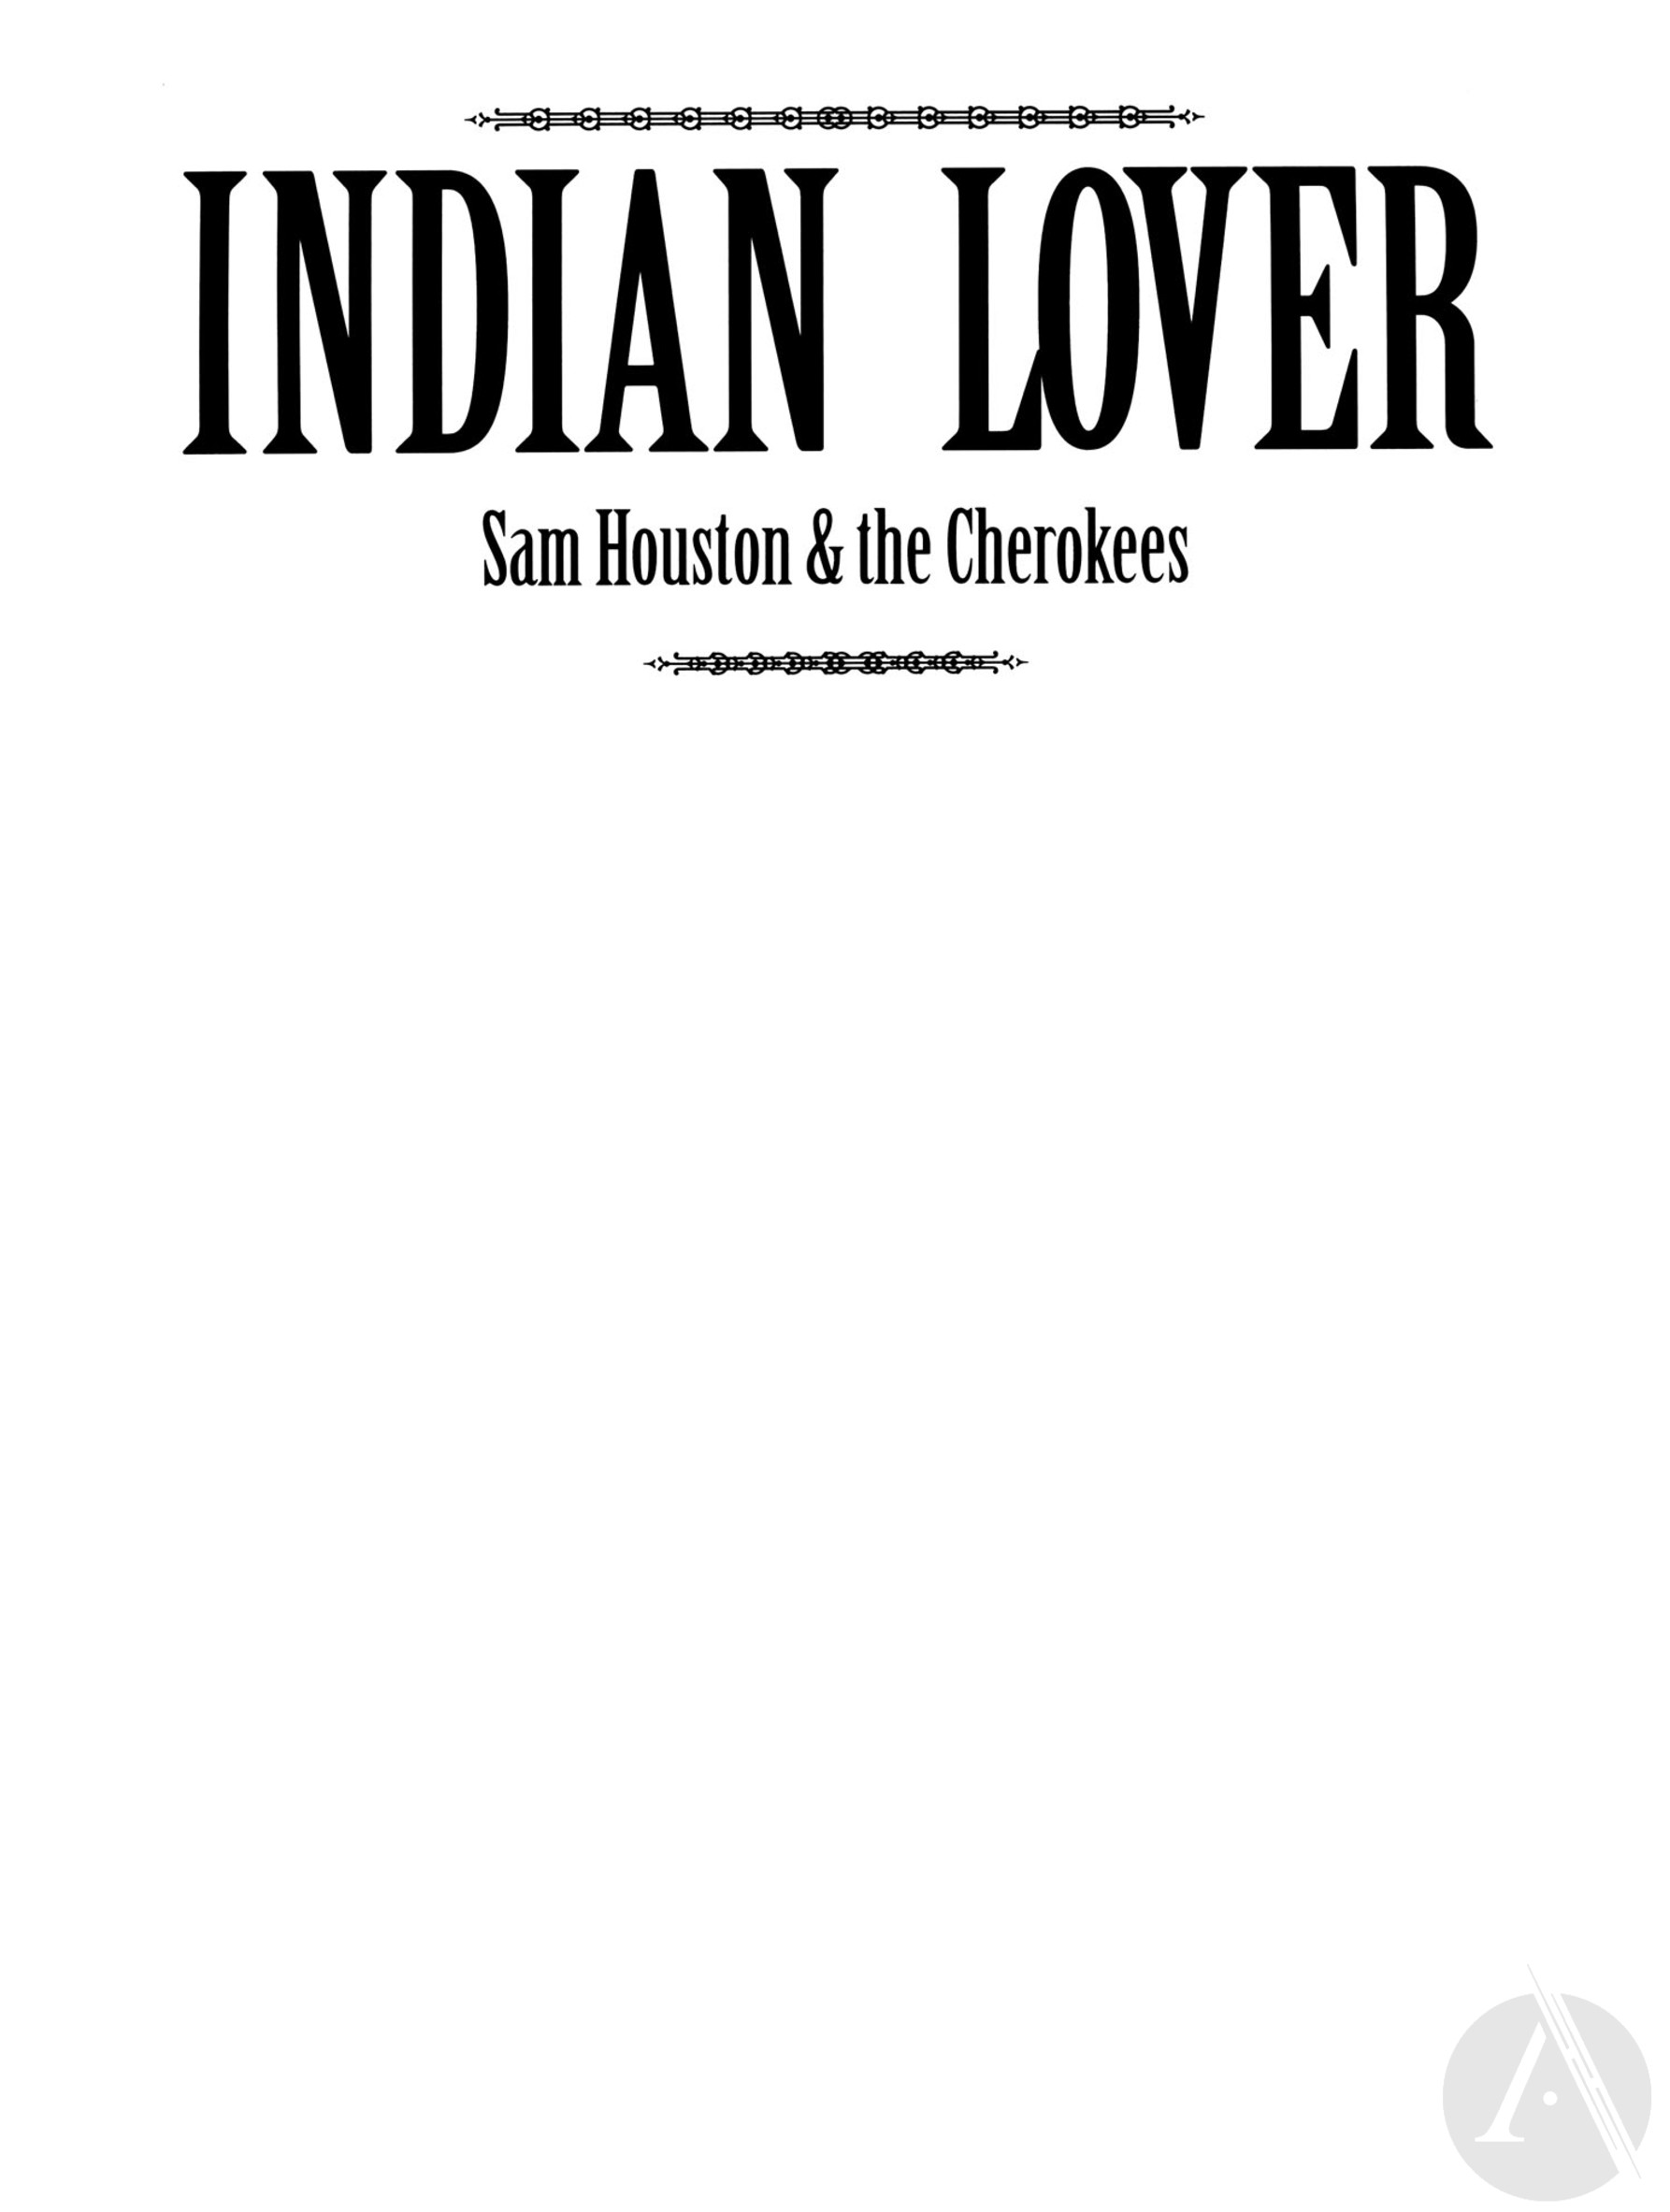 Read online Indian Lover: Sam Houston & the Cherokees comic -  Issue # TPB - 3